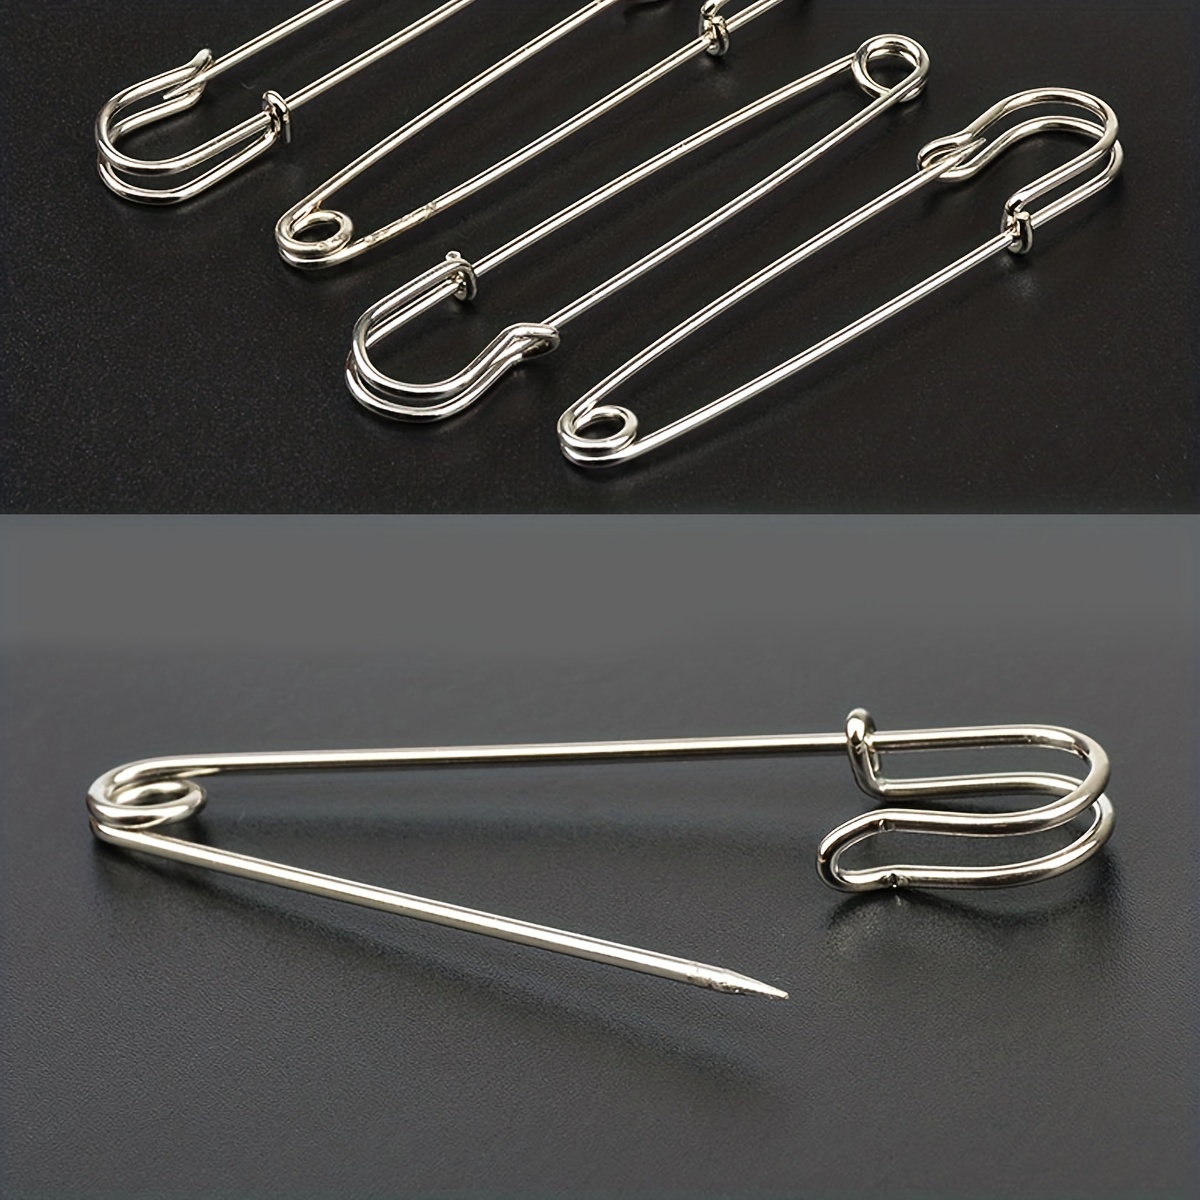 Uxcell Safety Pins 1.5 inch Large Metal Sewing Pins Bronze Tone 20pcs